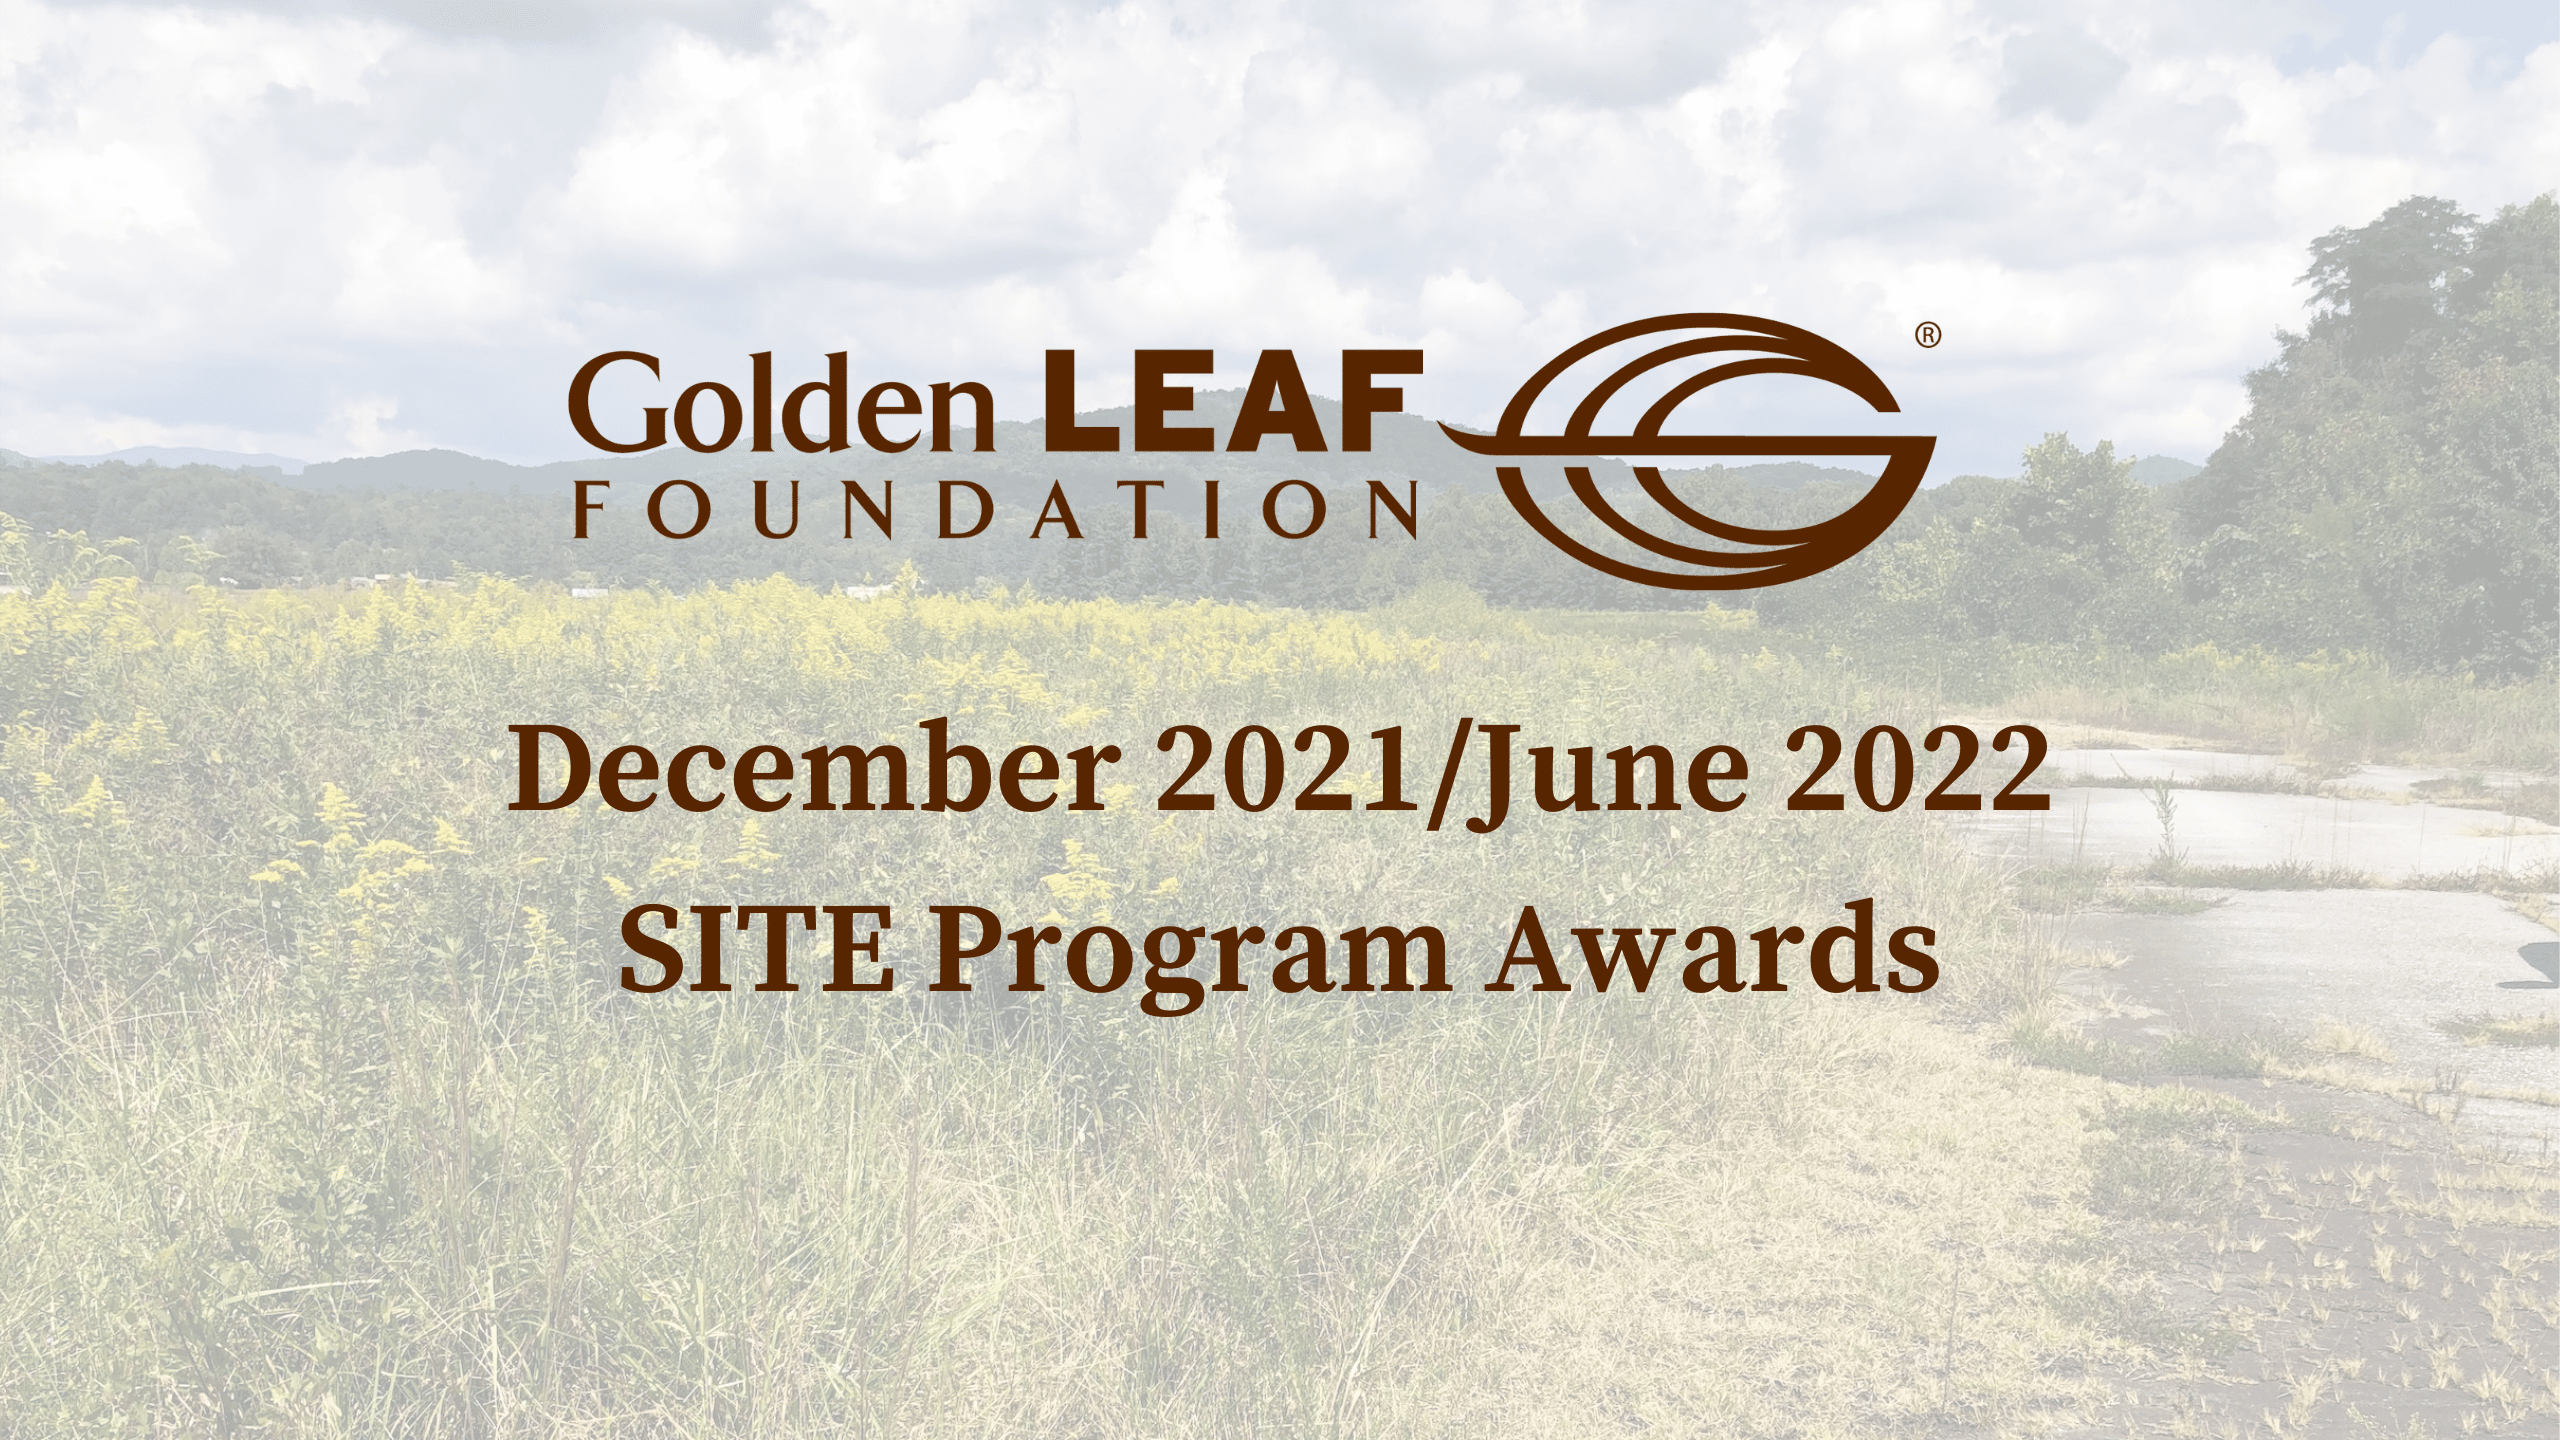 Golden LEAF Board of Directors awards $10 million in first two rounds of SITE Program